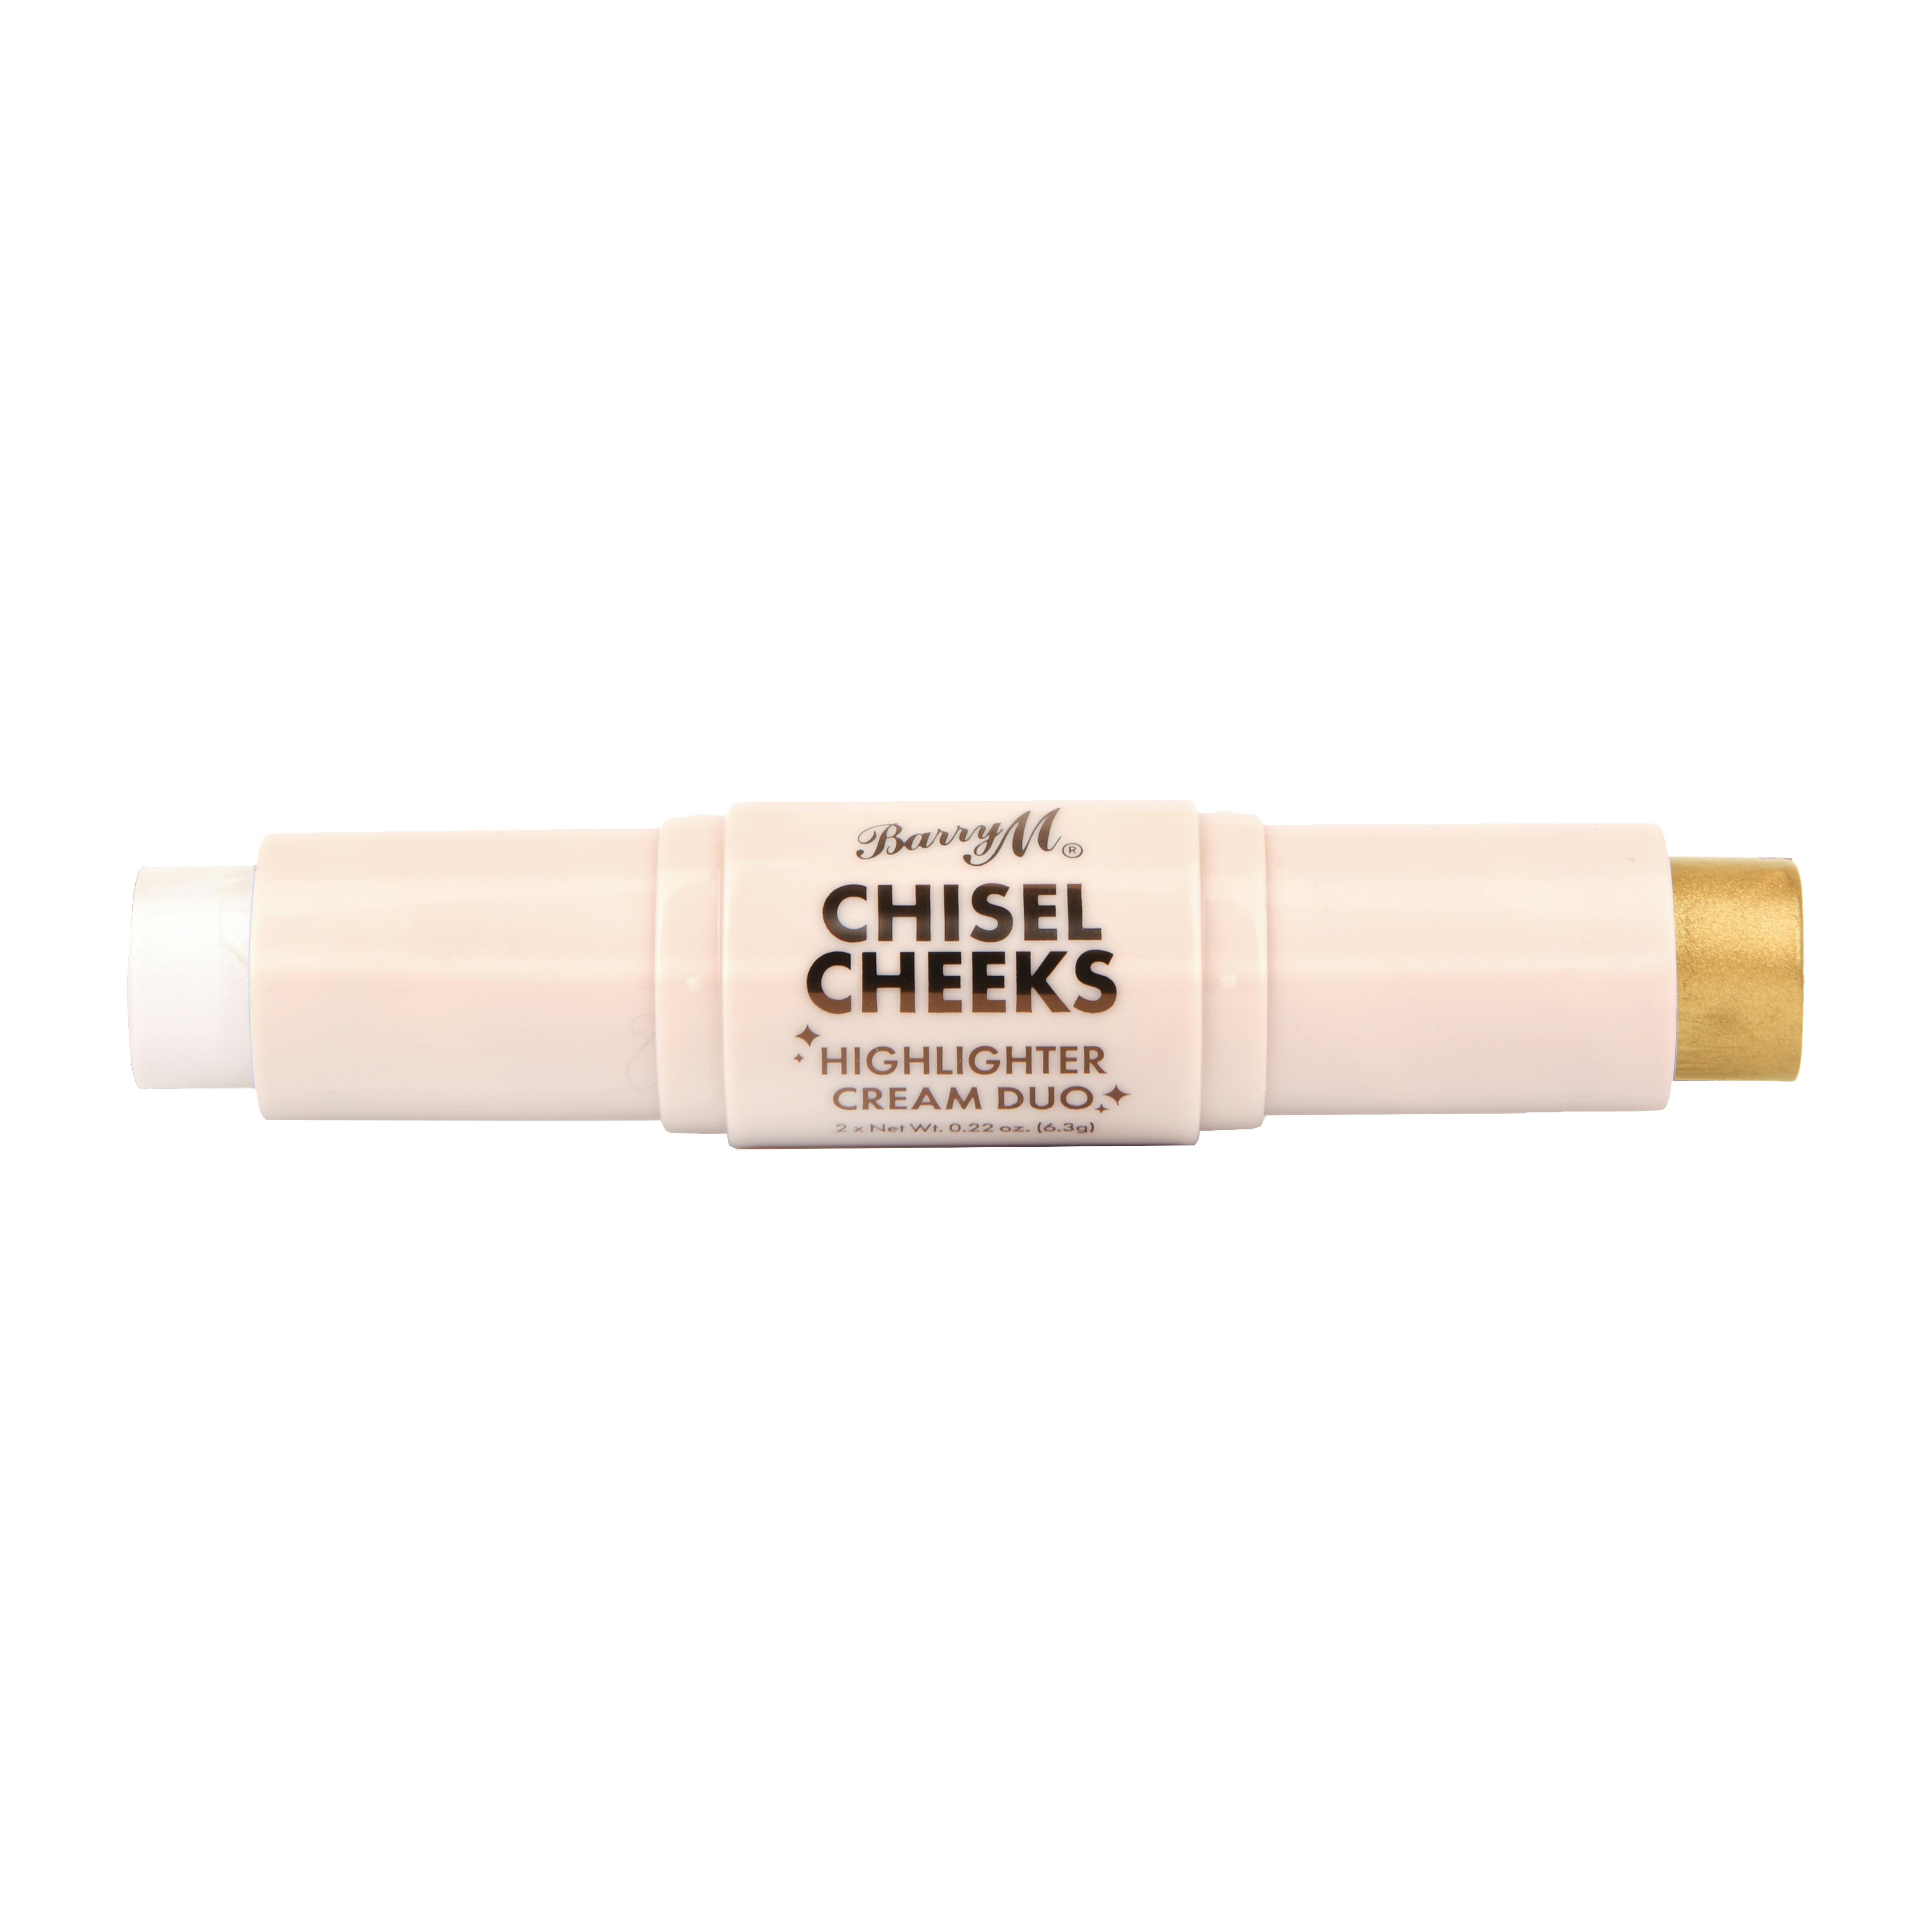 Barry M. Chisel Cheeks Highlighter Cream Duo Silver/Gold 12,6 g